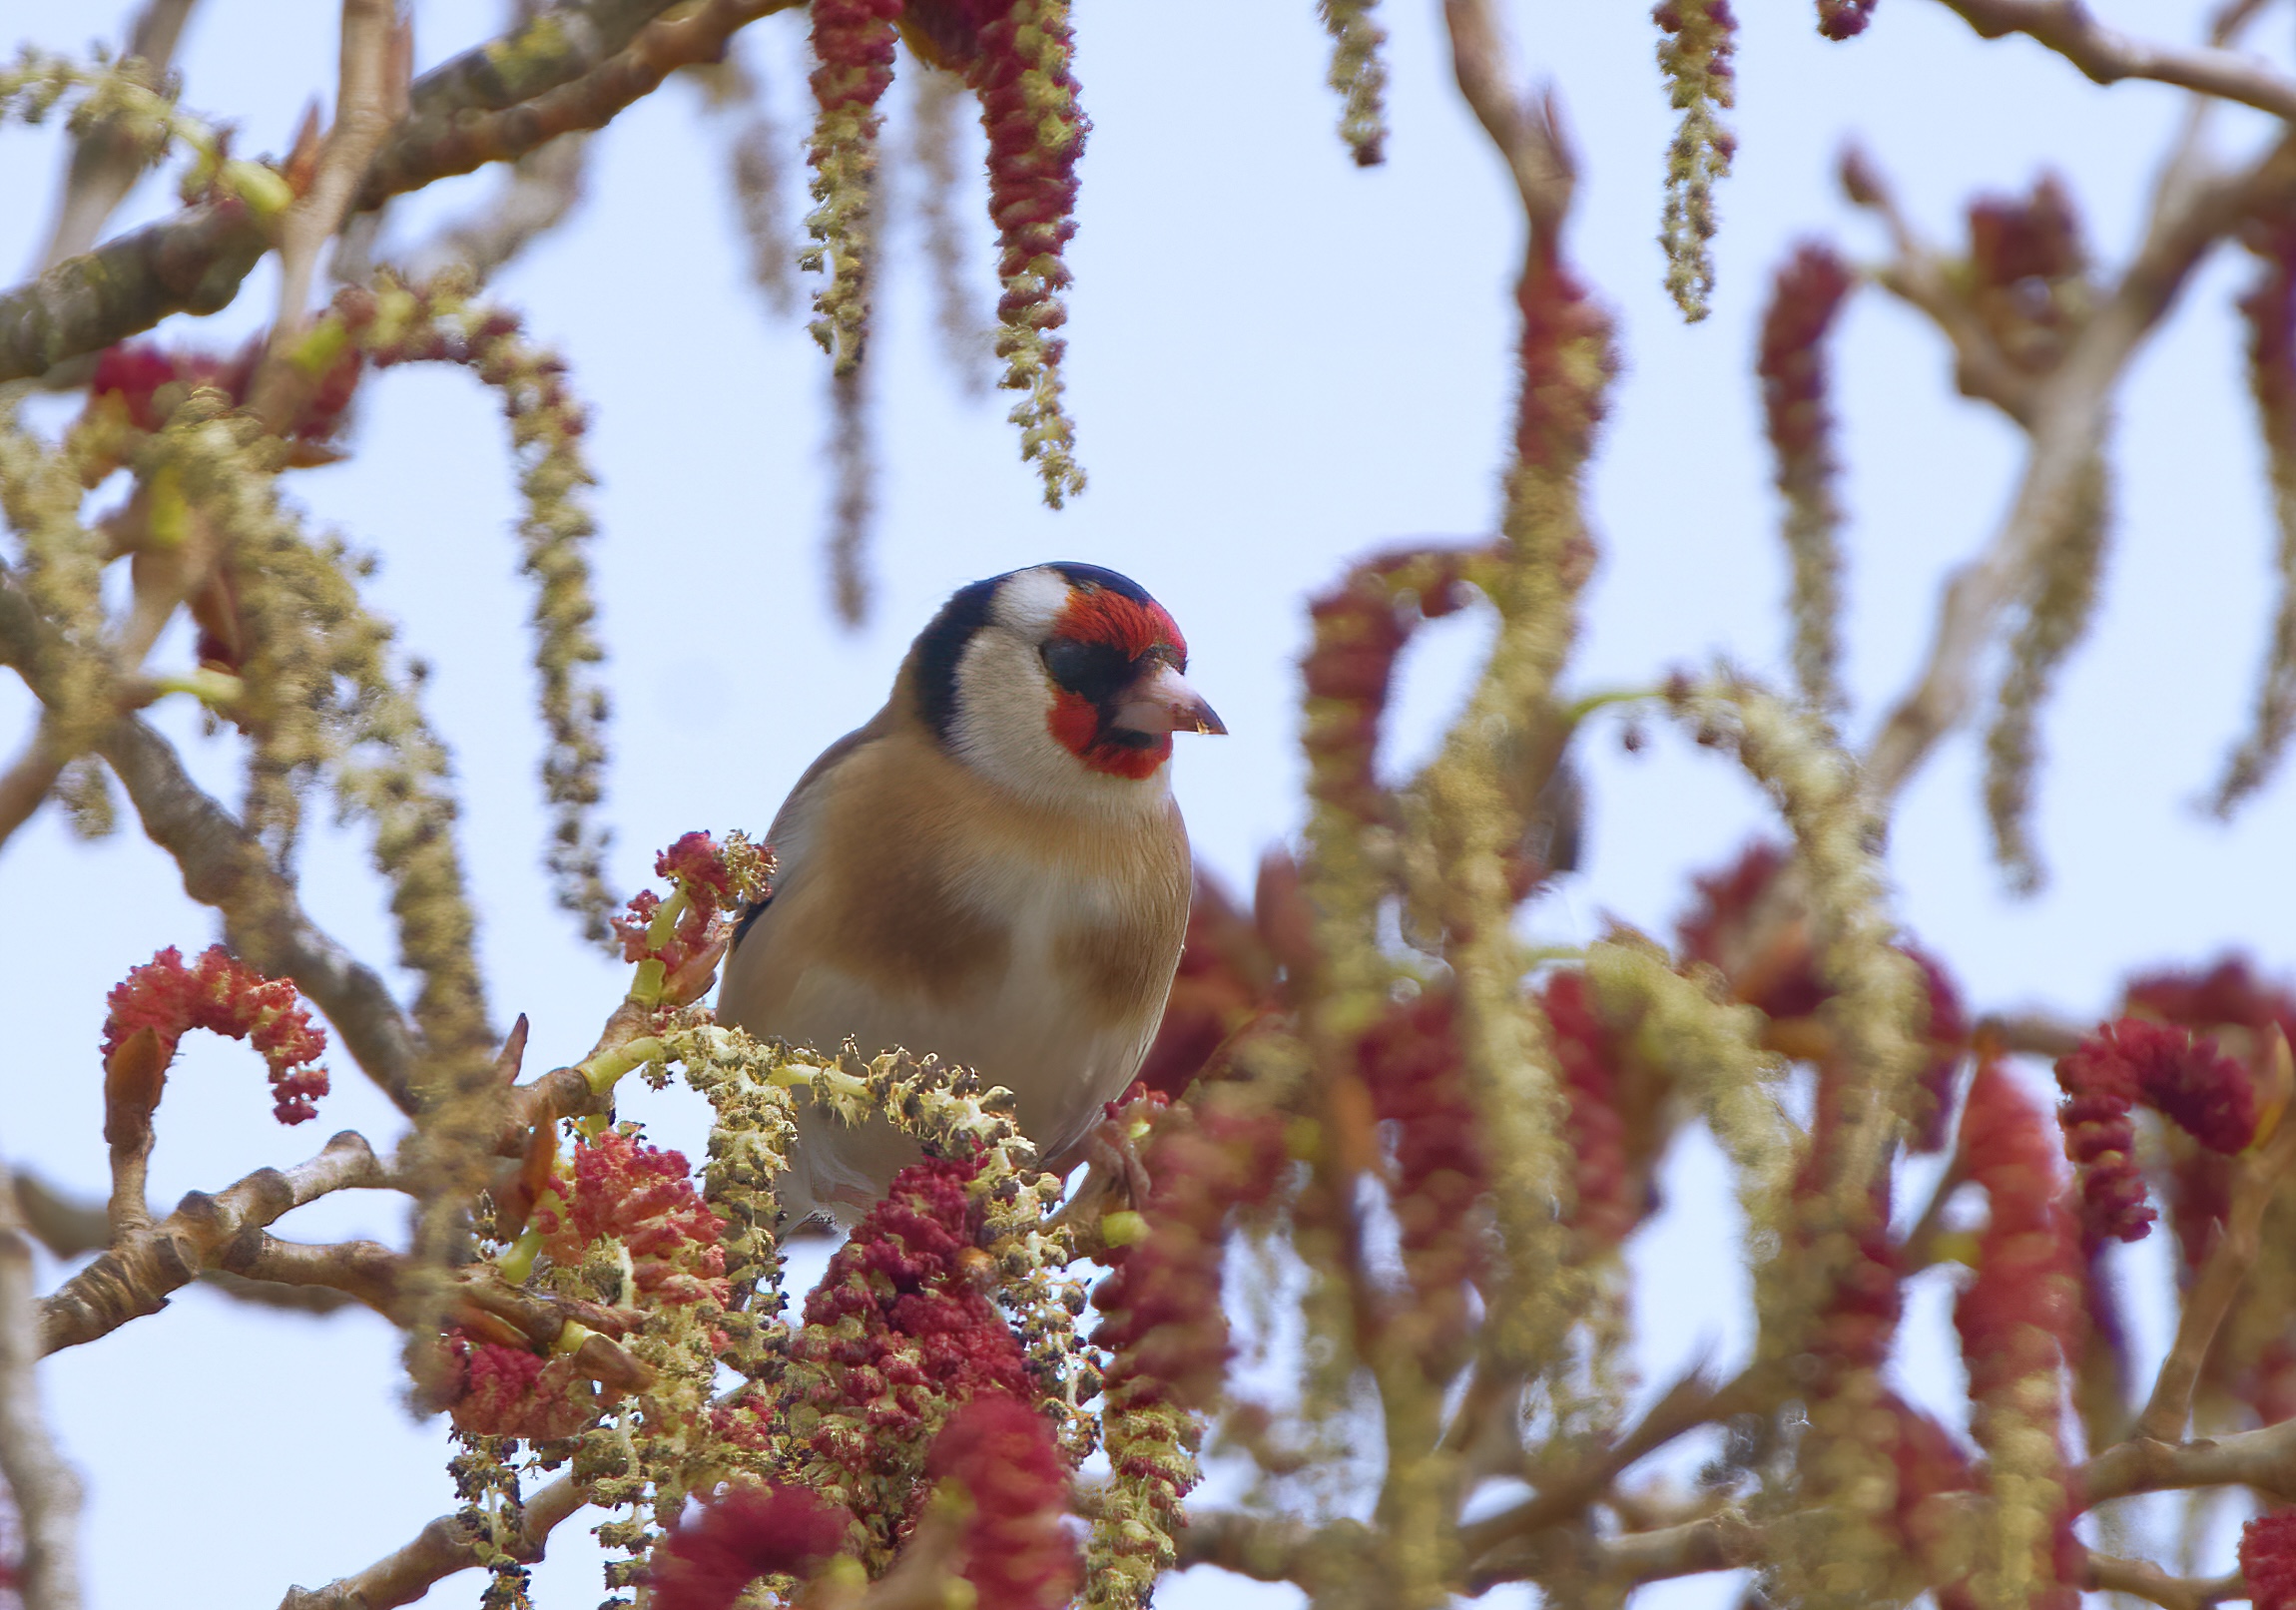 The goldfinch feasts with flowers...